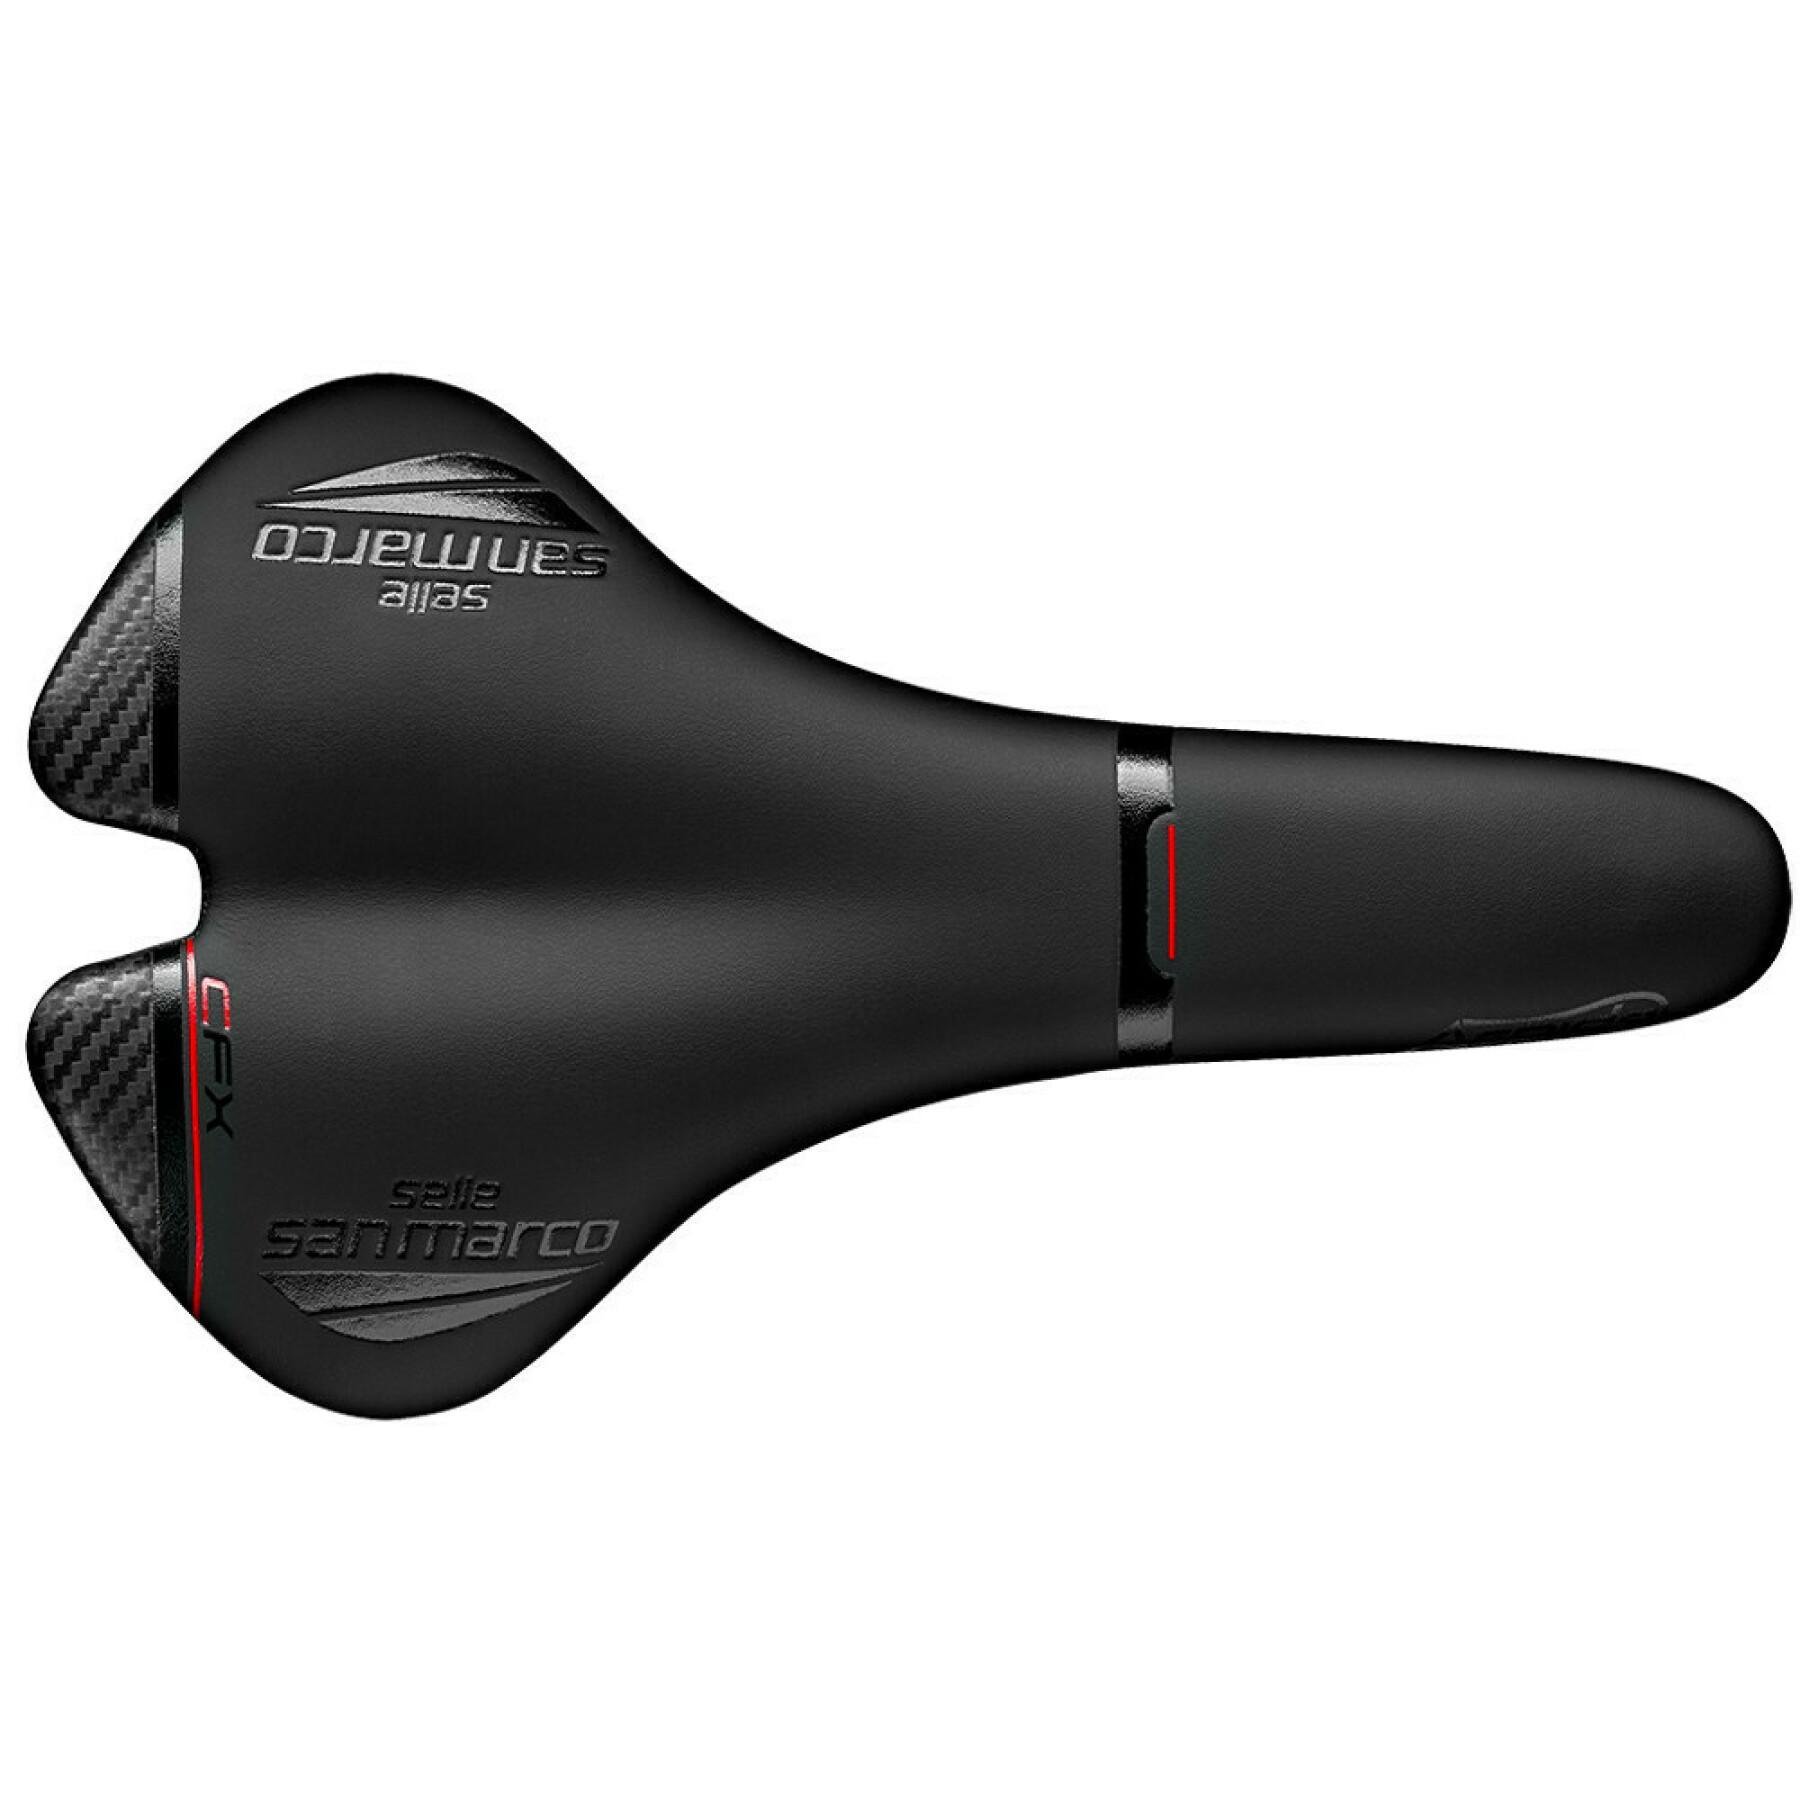 Siodło Selle San Marco Aspide Full-Fit Carbon FX